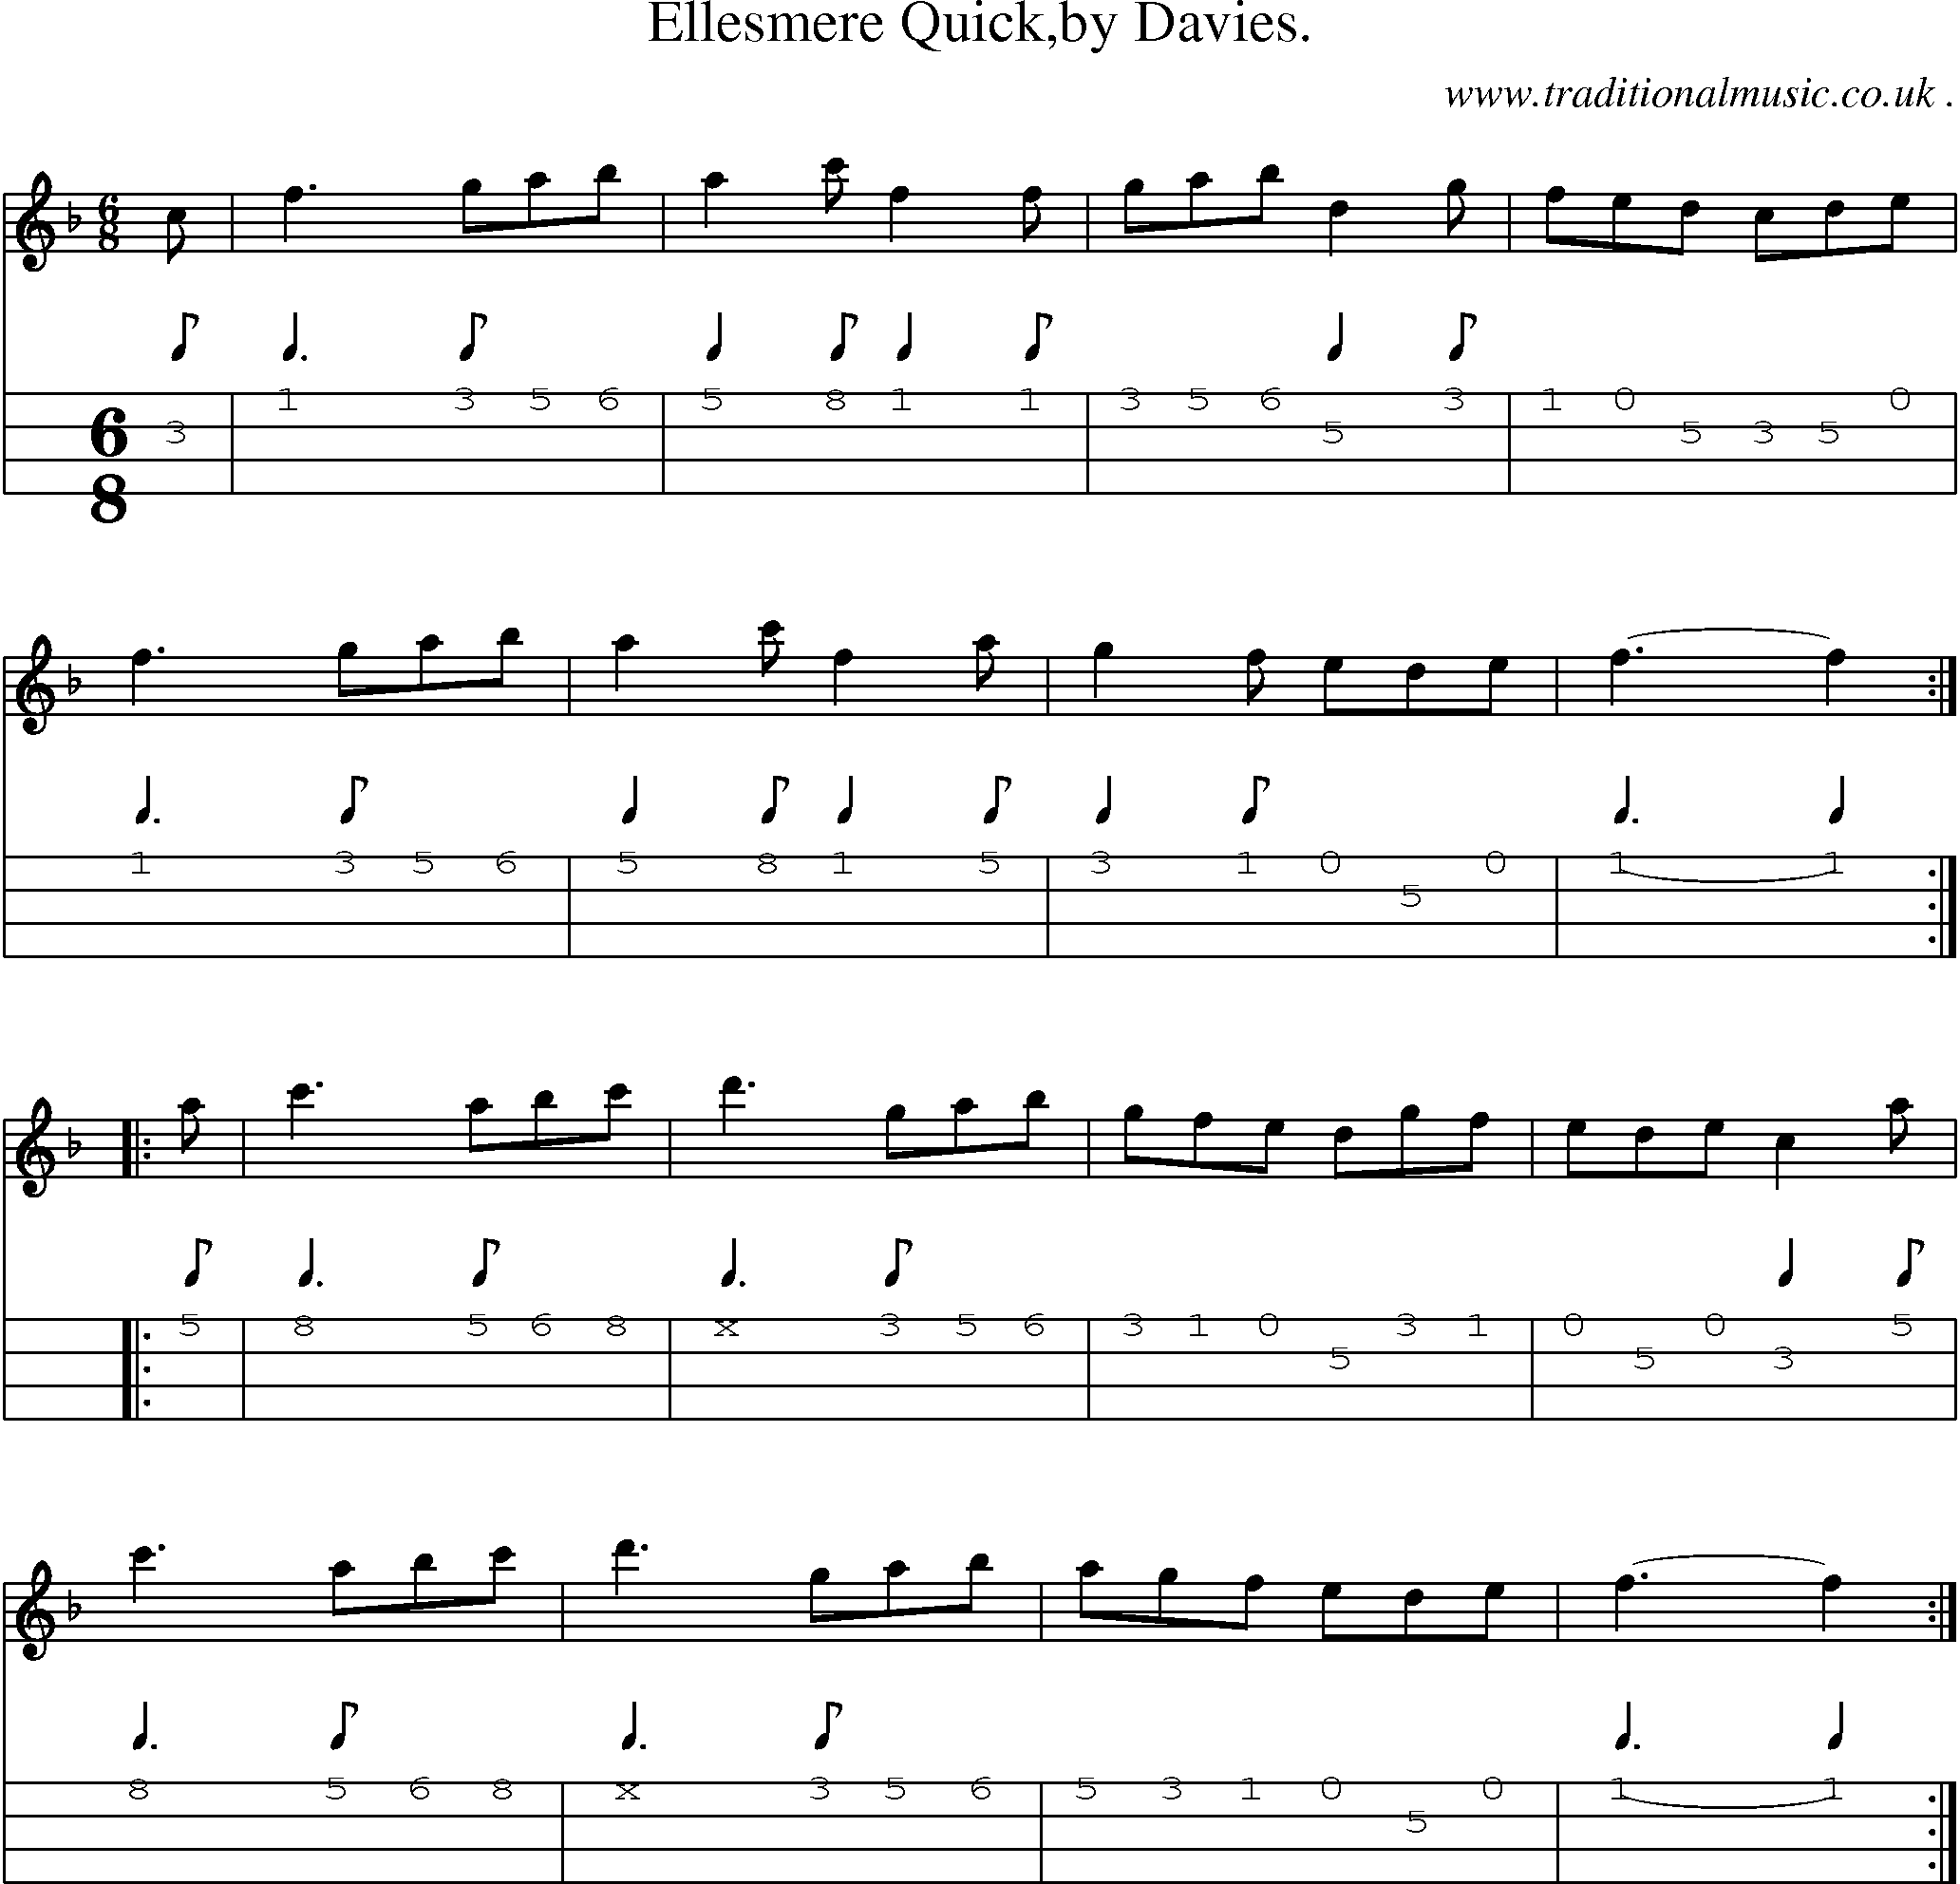 Sheet-Music and Mandolin Tabs for Ellesmere Quickby Davies